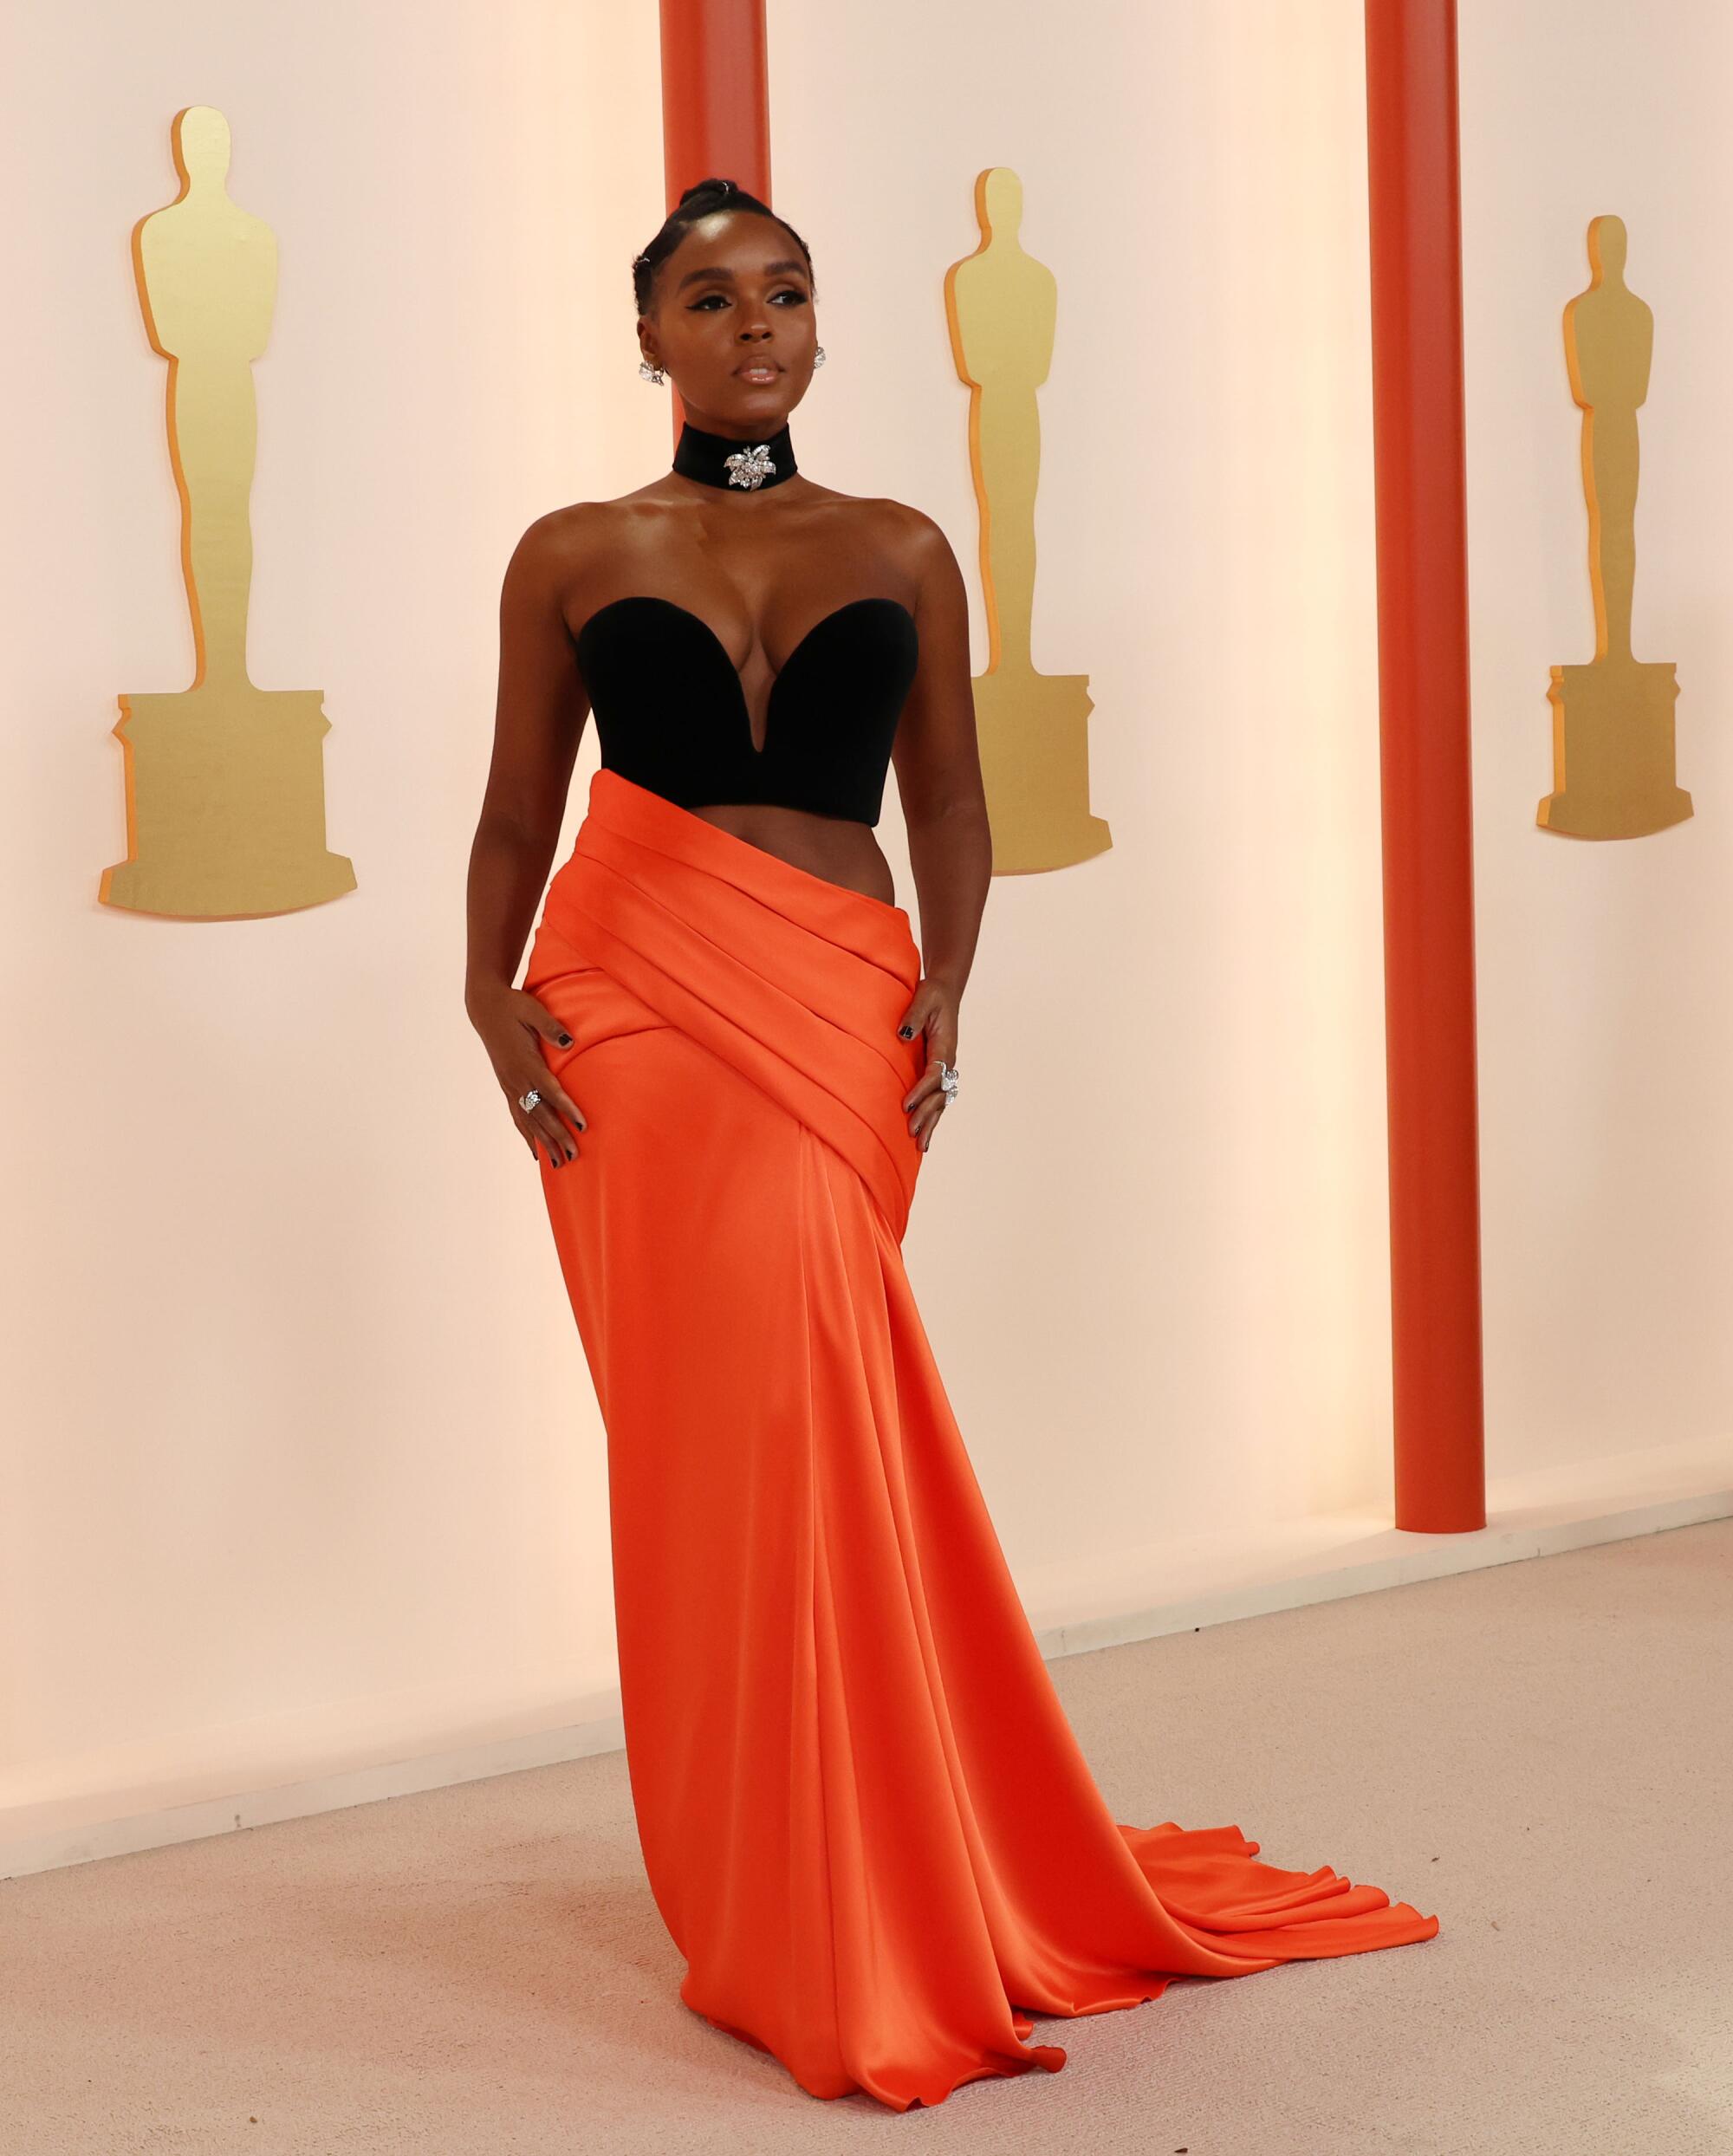 The Oscars 2023 Red Carpet Was All About the Sheer Dress Trend